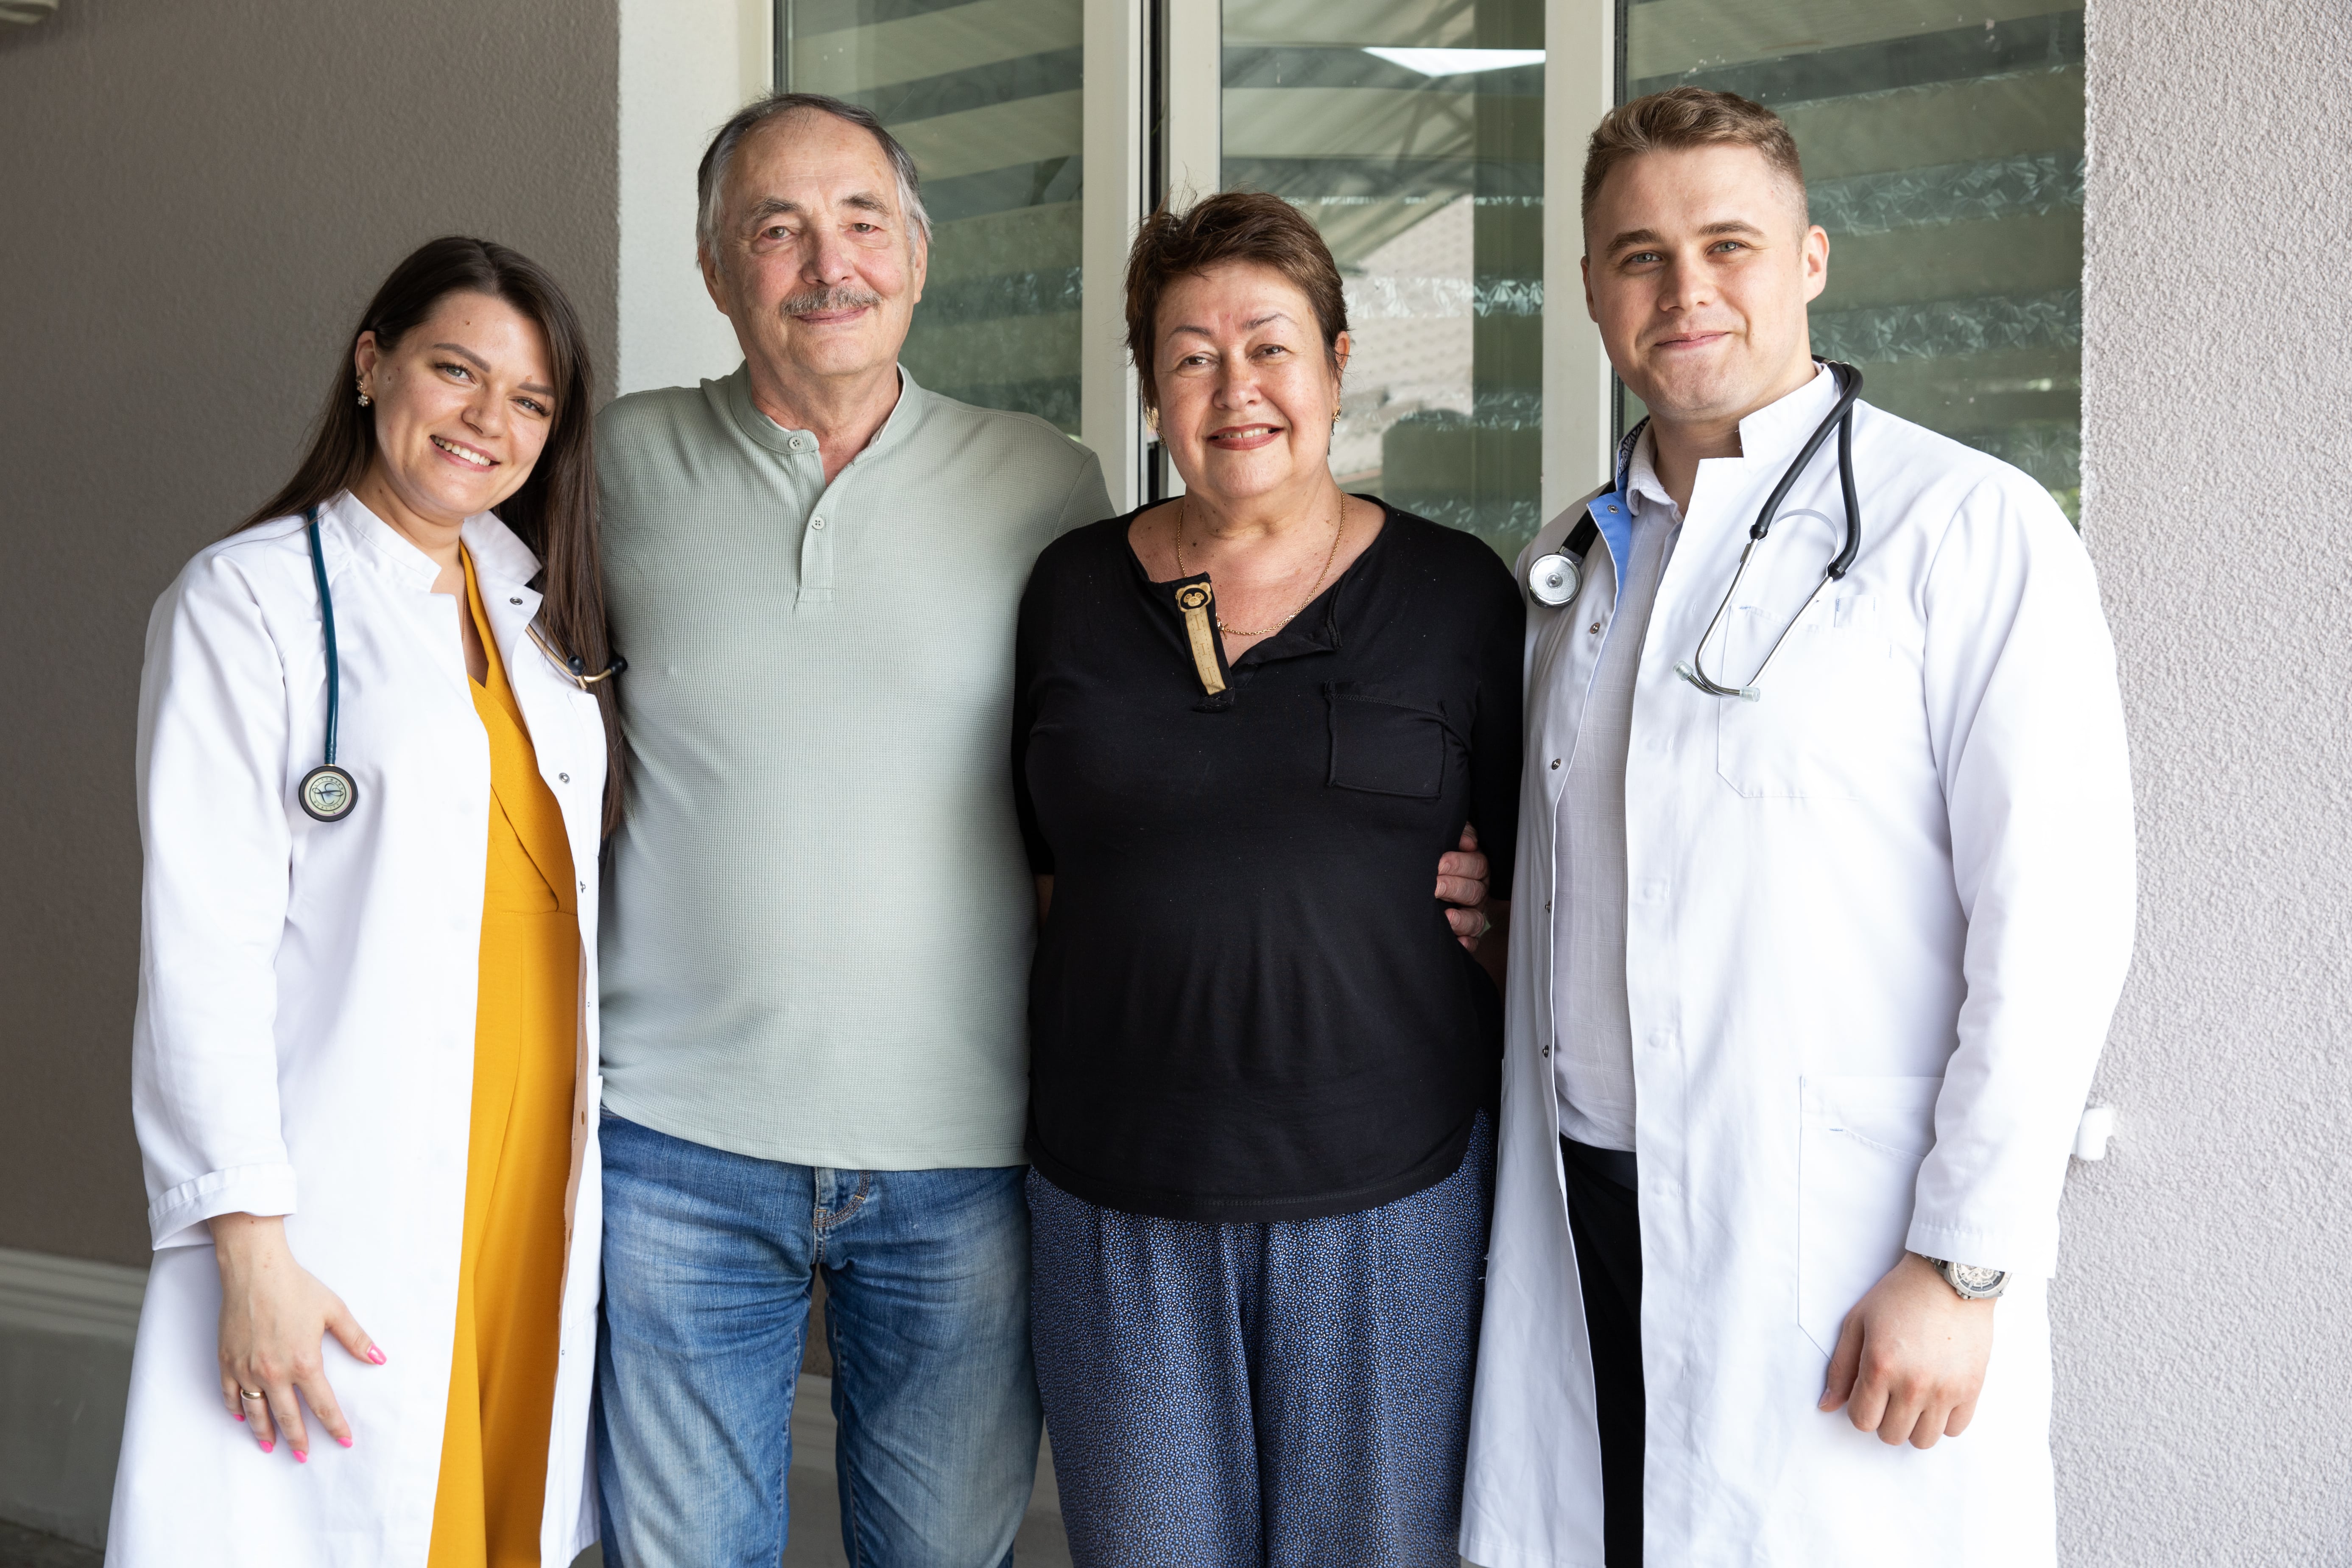 a group of doctors standing together with their patient